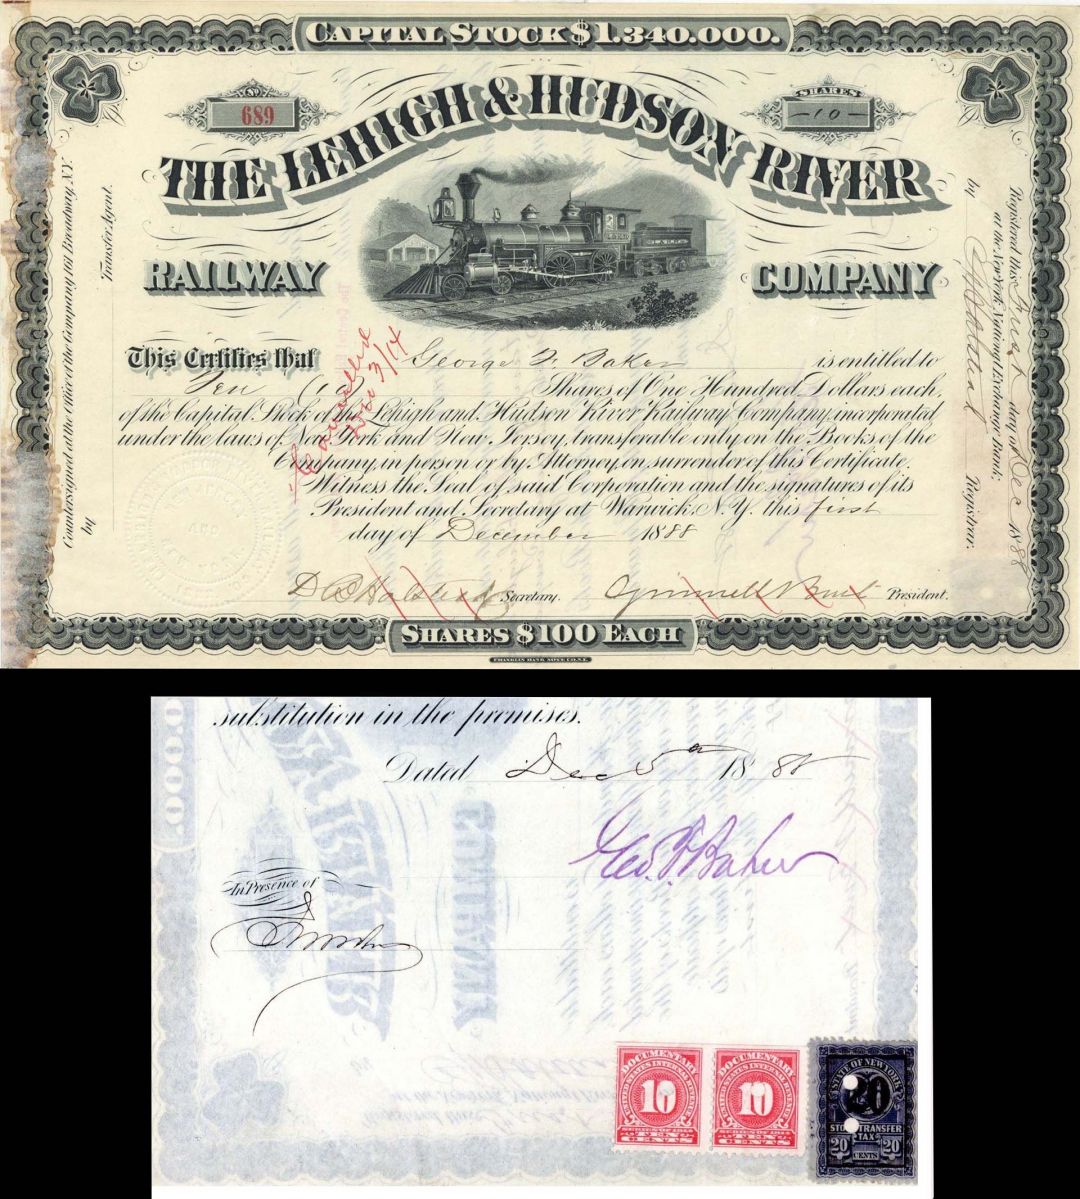 Lehigh and Hudson River Railway Co. Issued to and Signed by Geo. F. Baker - Stock Certificate